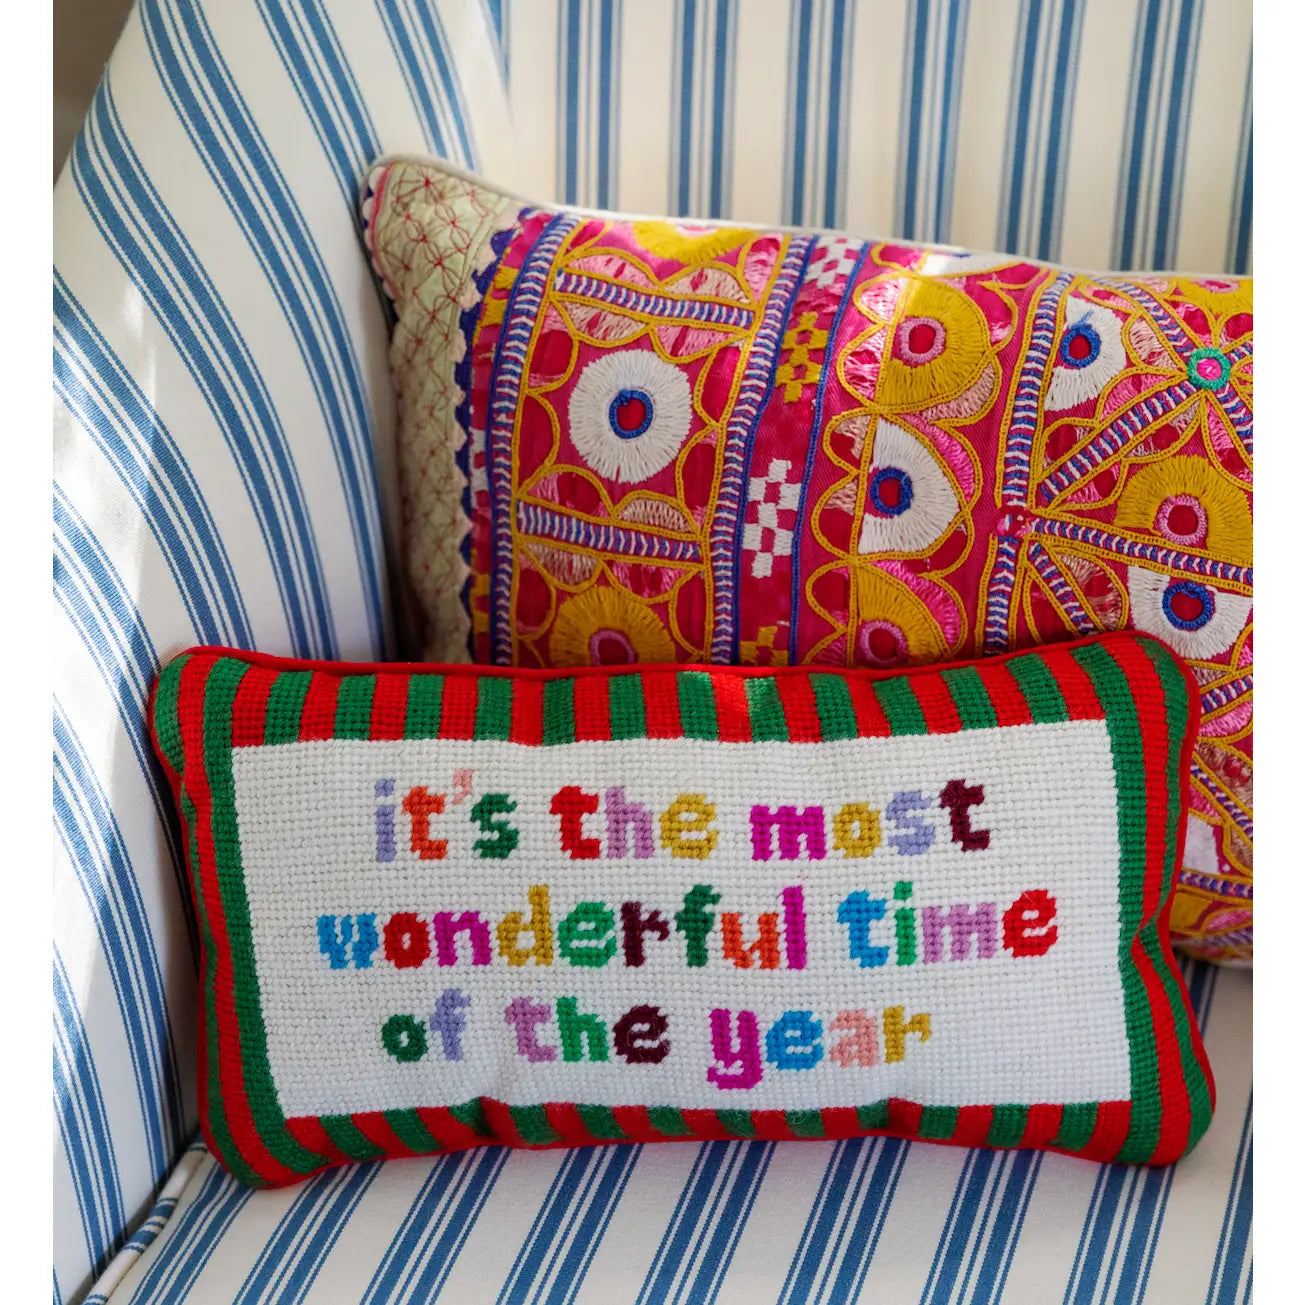 MOST WONDERFUL TIME OF THE YEAR PILLOW